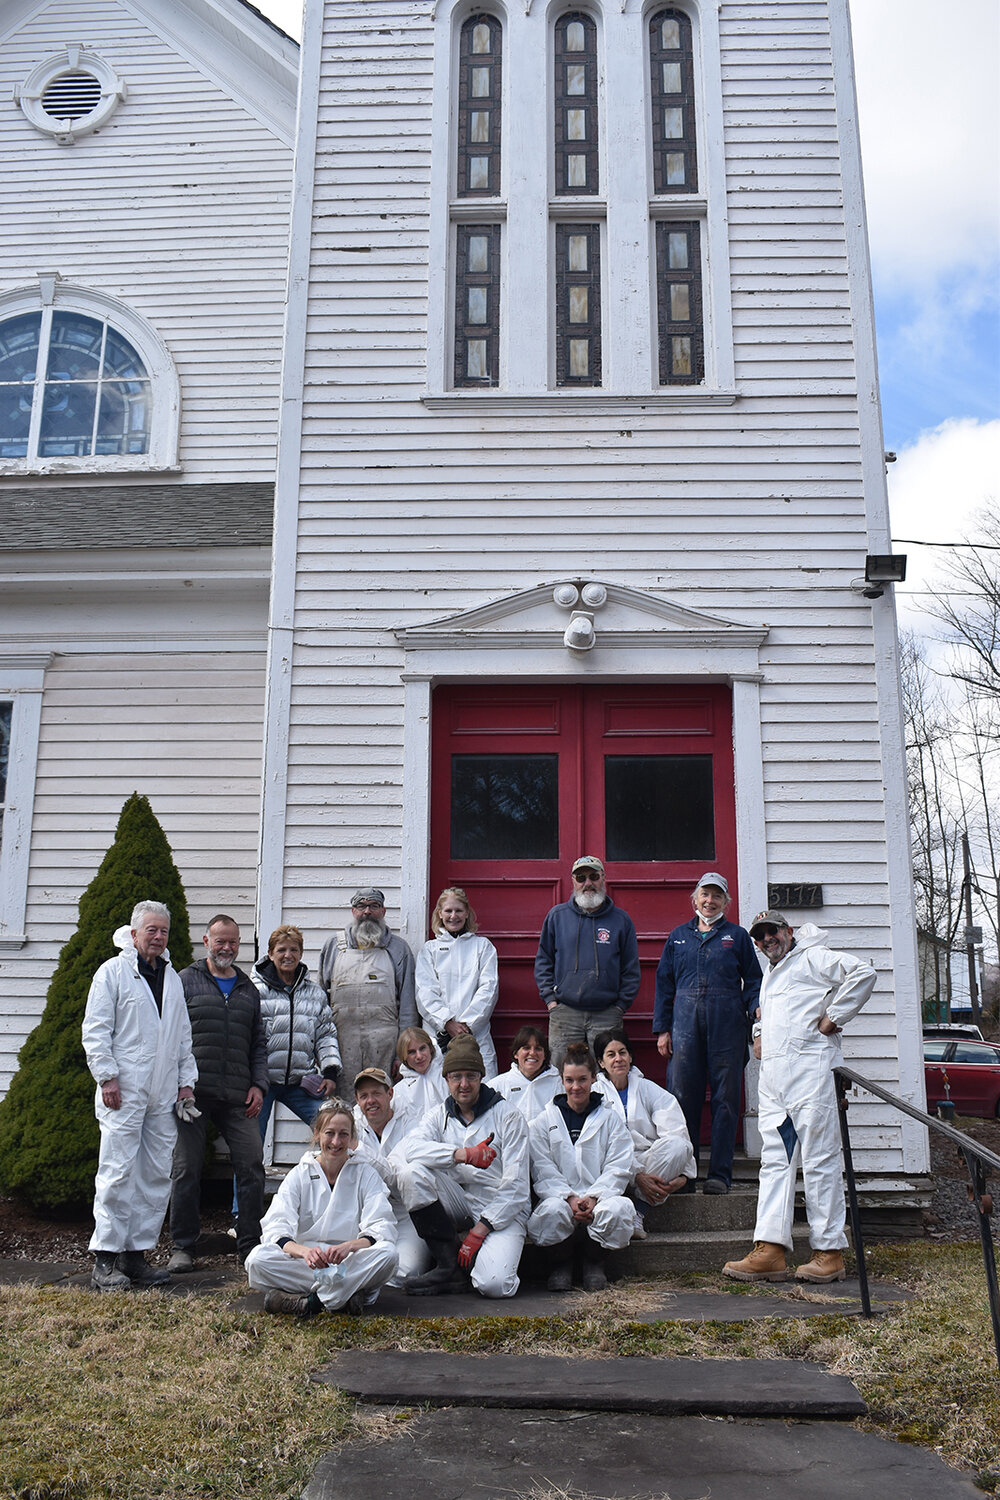 Fifteen of the 20 volunteers who donned hazmat suits and cleaned out the basement of the Presbyterian Church in New Kingston to make way for a Community Center, Saturday, March 16.